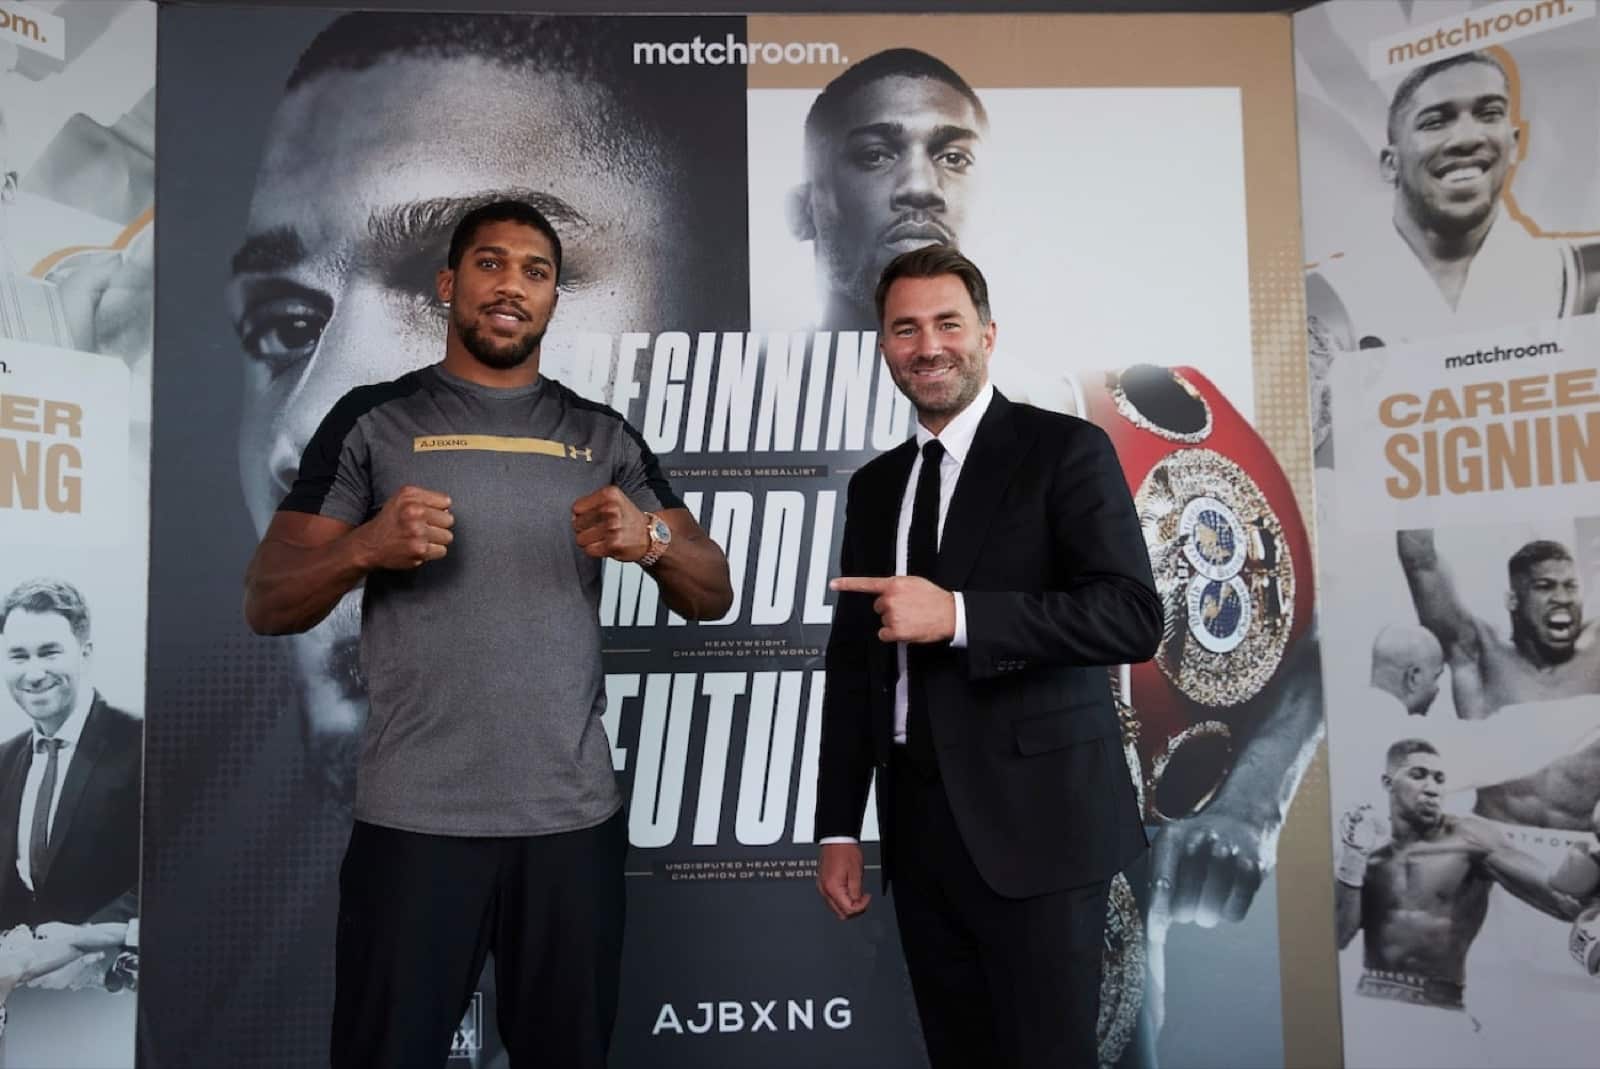 Bob Arum says Eddie Hearn stalling Fury - Joshua because he doesn't want the match